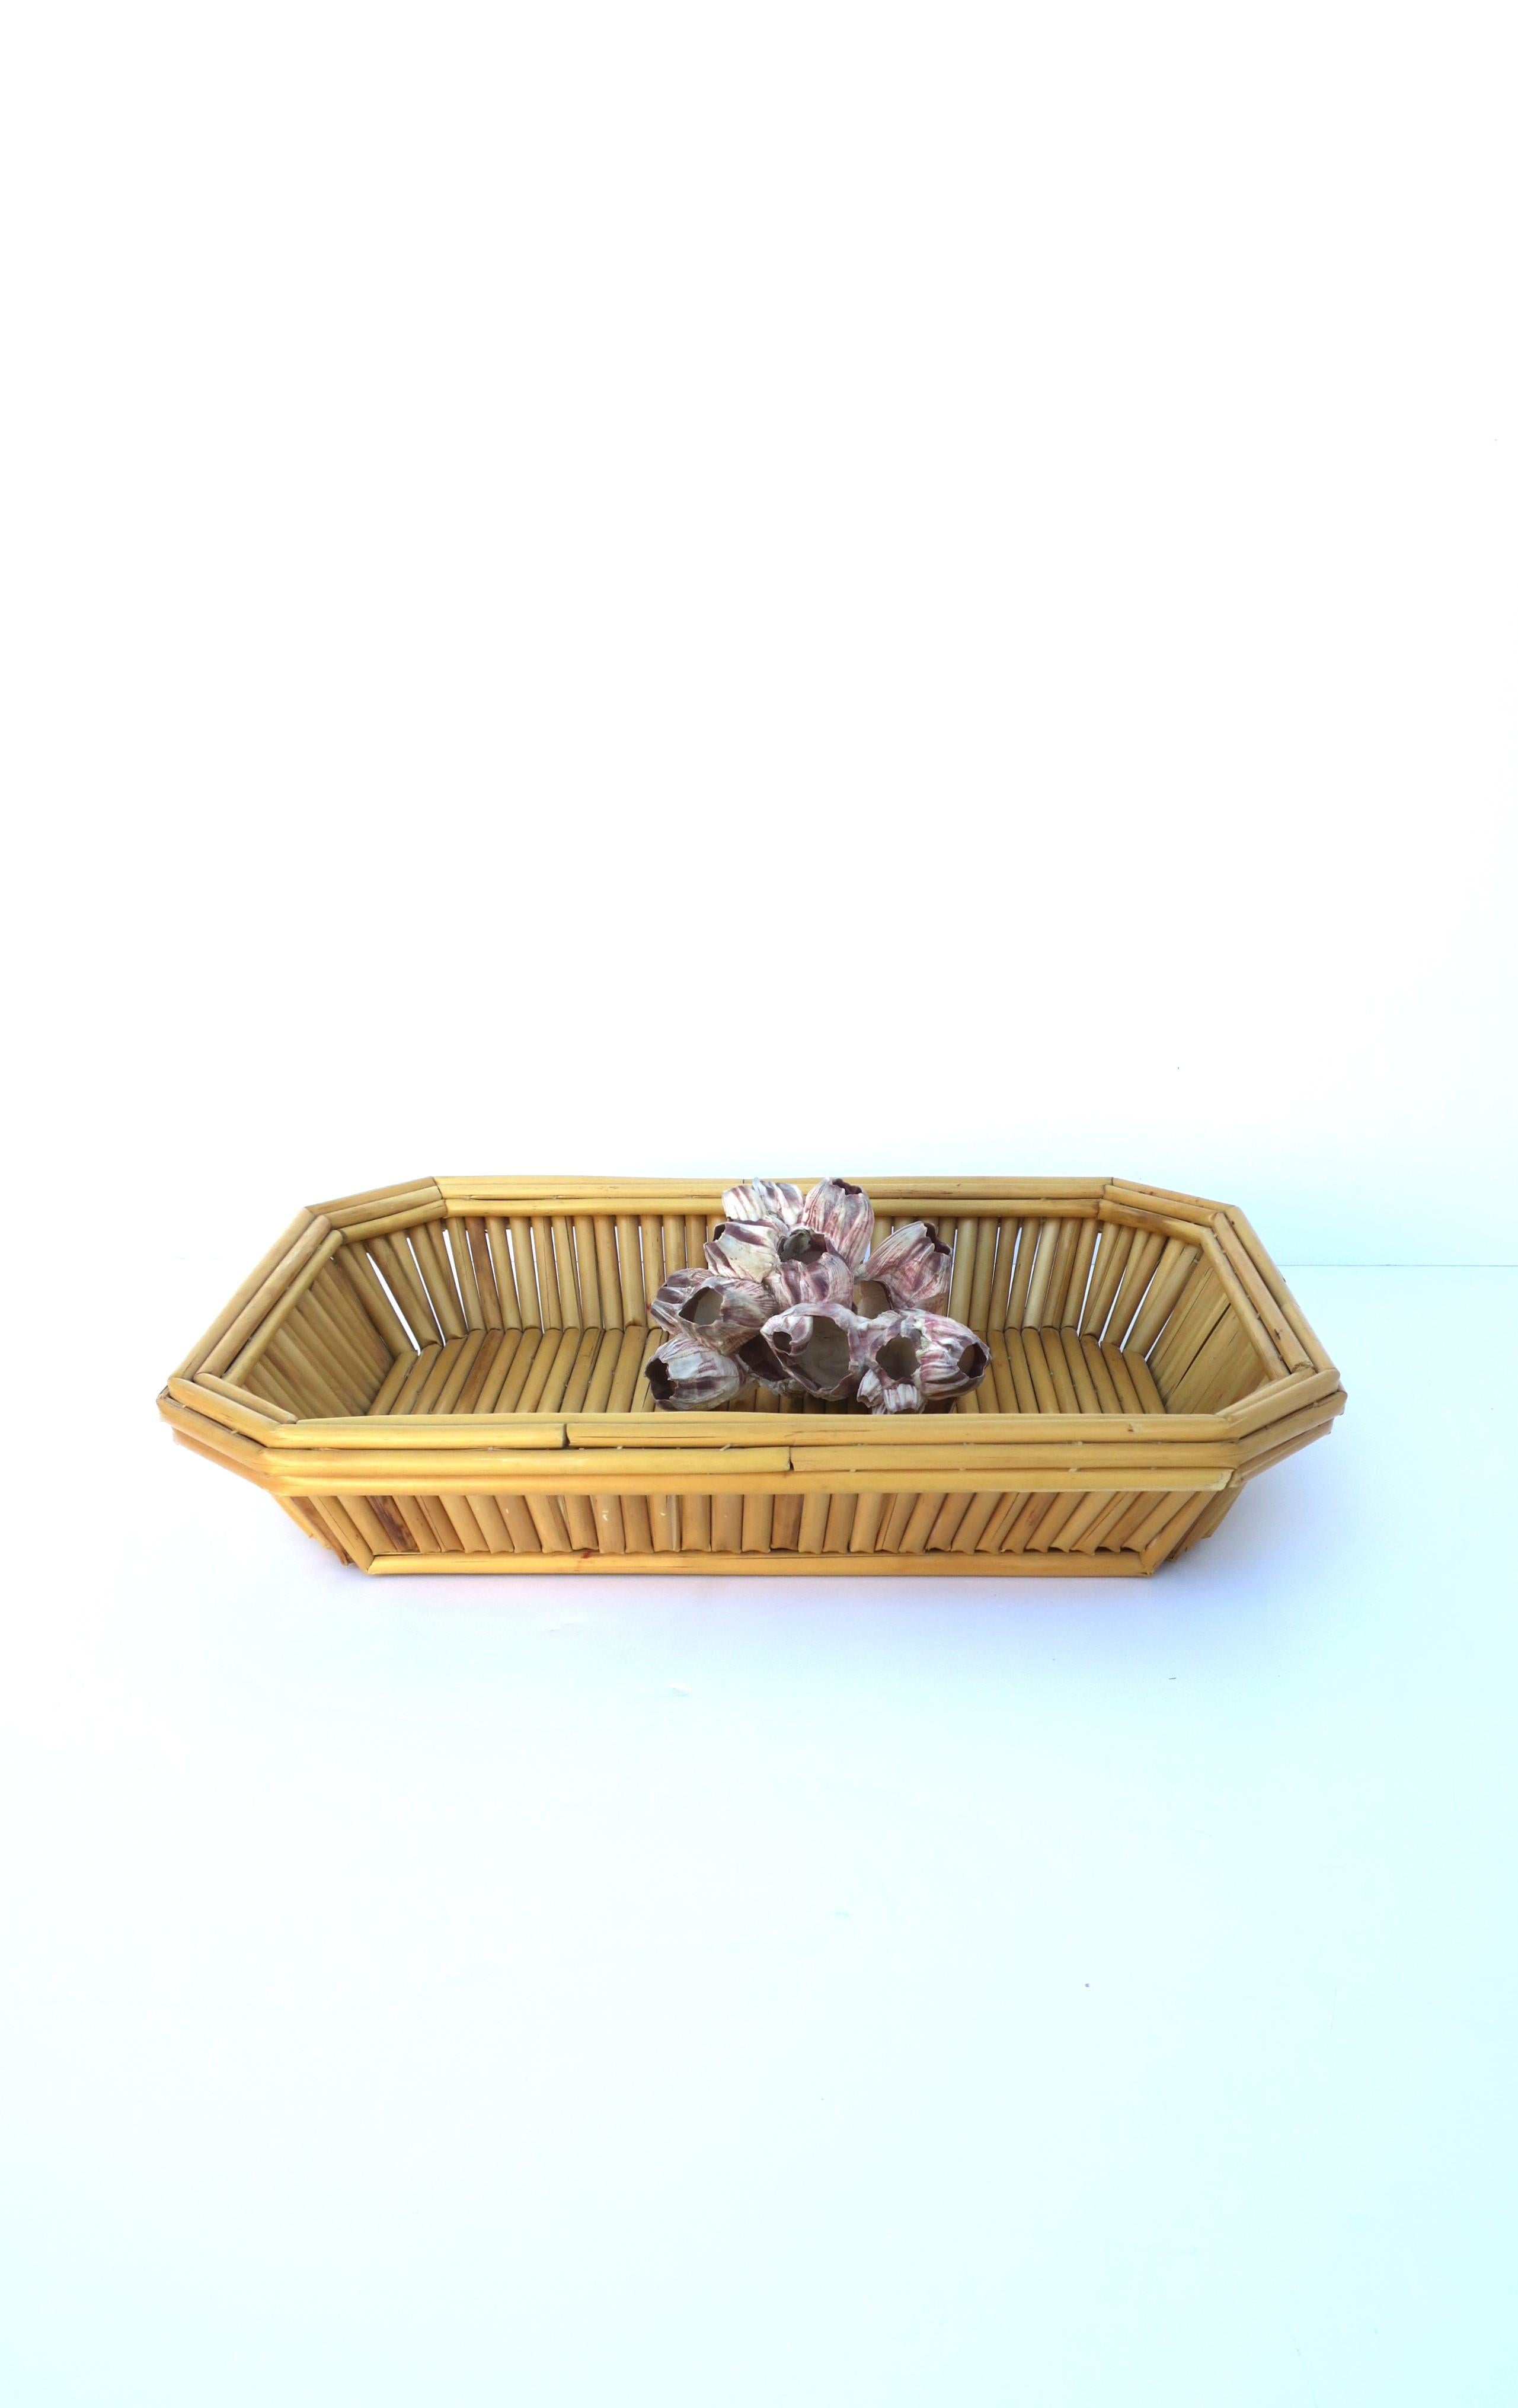 Wicker Tray Basket Centerpiece In Good Condition For Sale In New York, NY